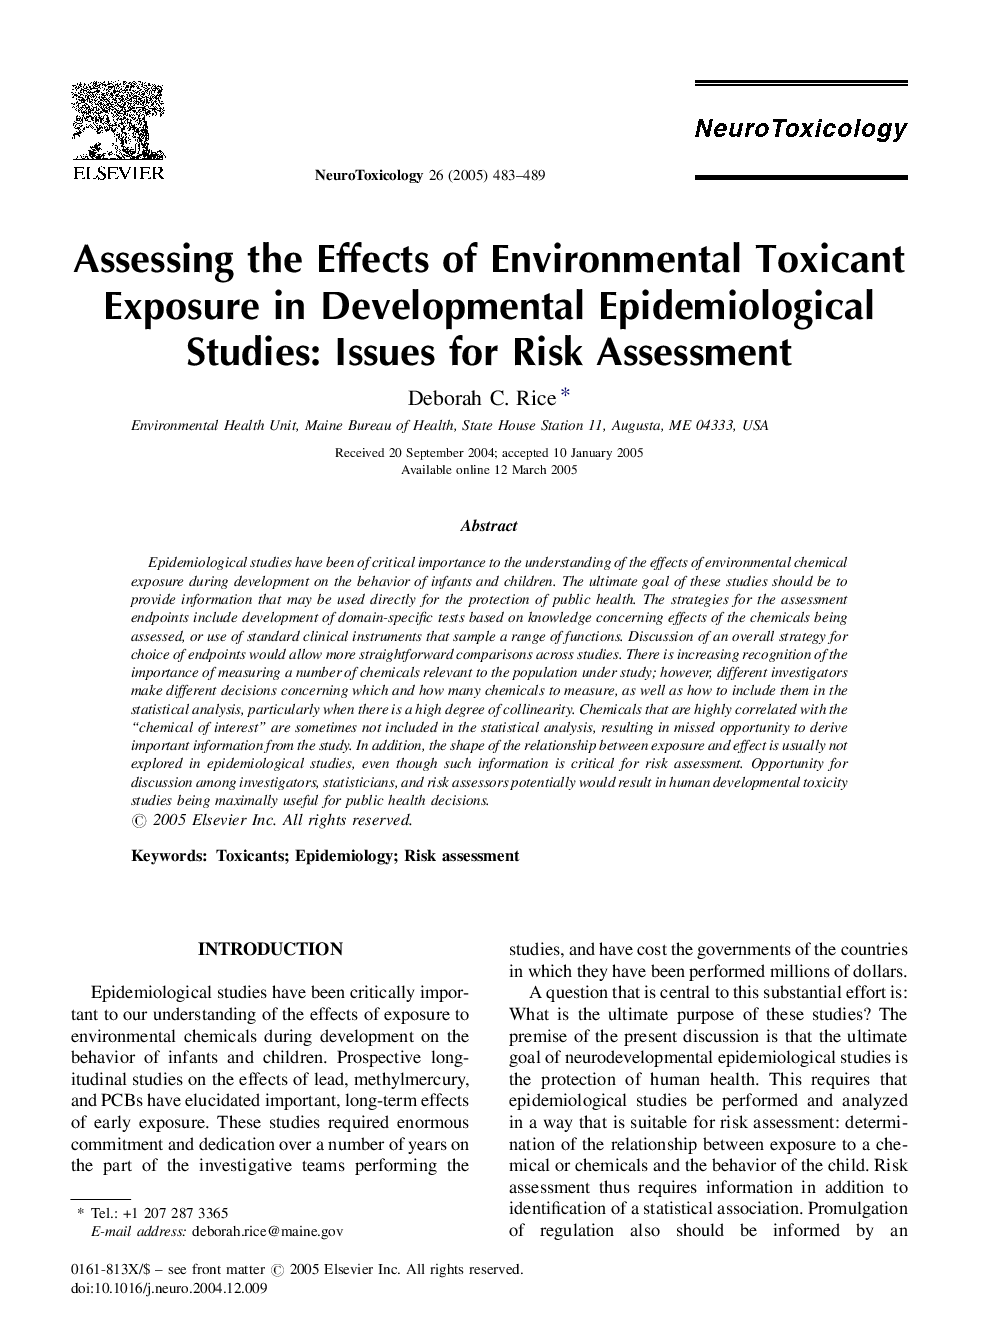 Assessing the Effects of Environmental Toxicant Exposure in Developmental Epidemiological Studies: Issues for Risk Assessment